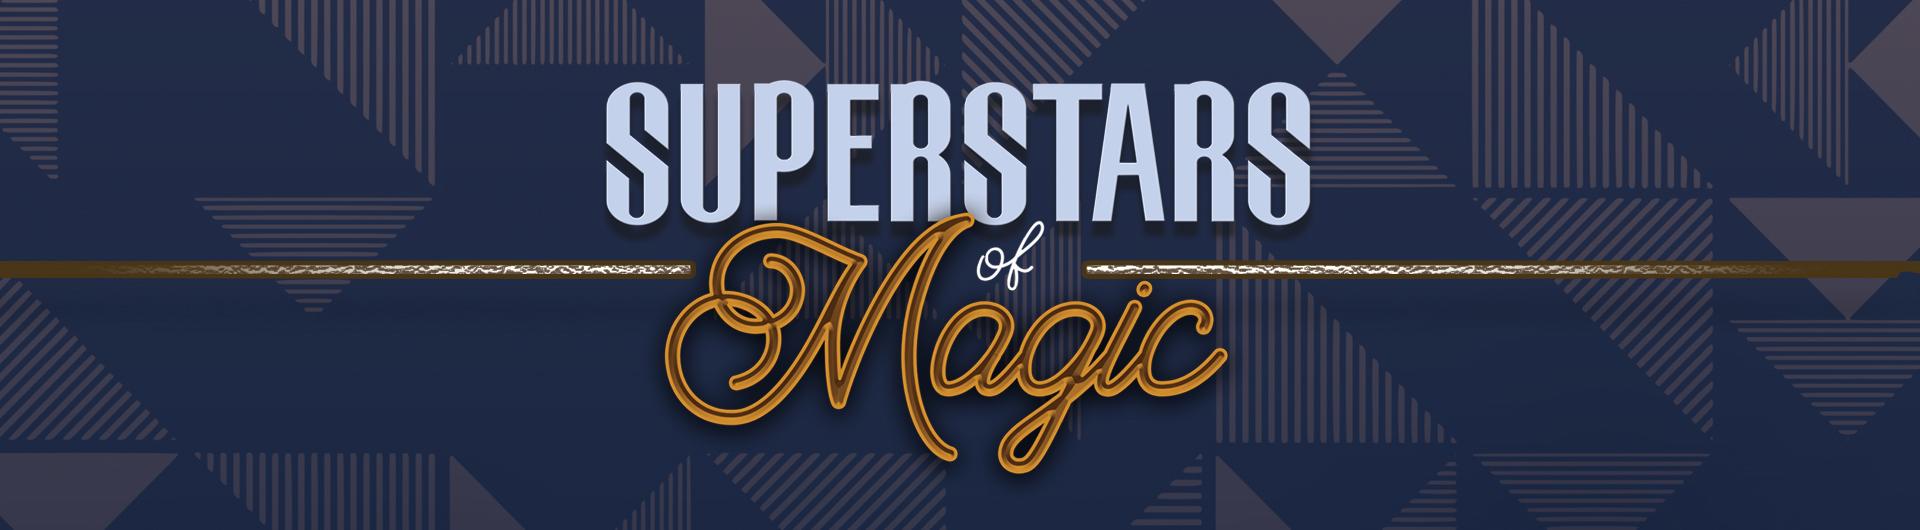 The stylized logo for Superstars of Magic